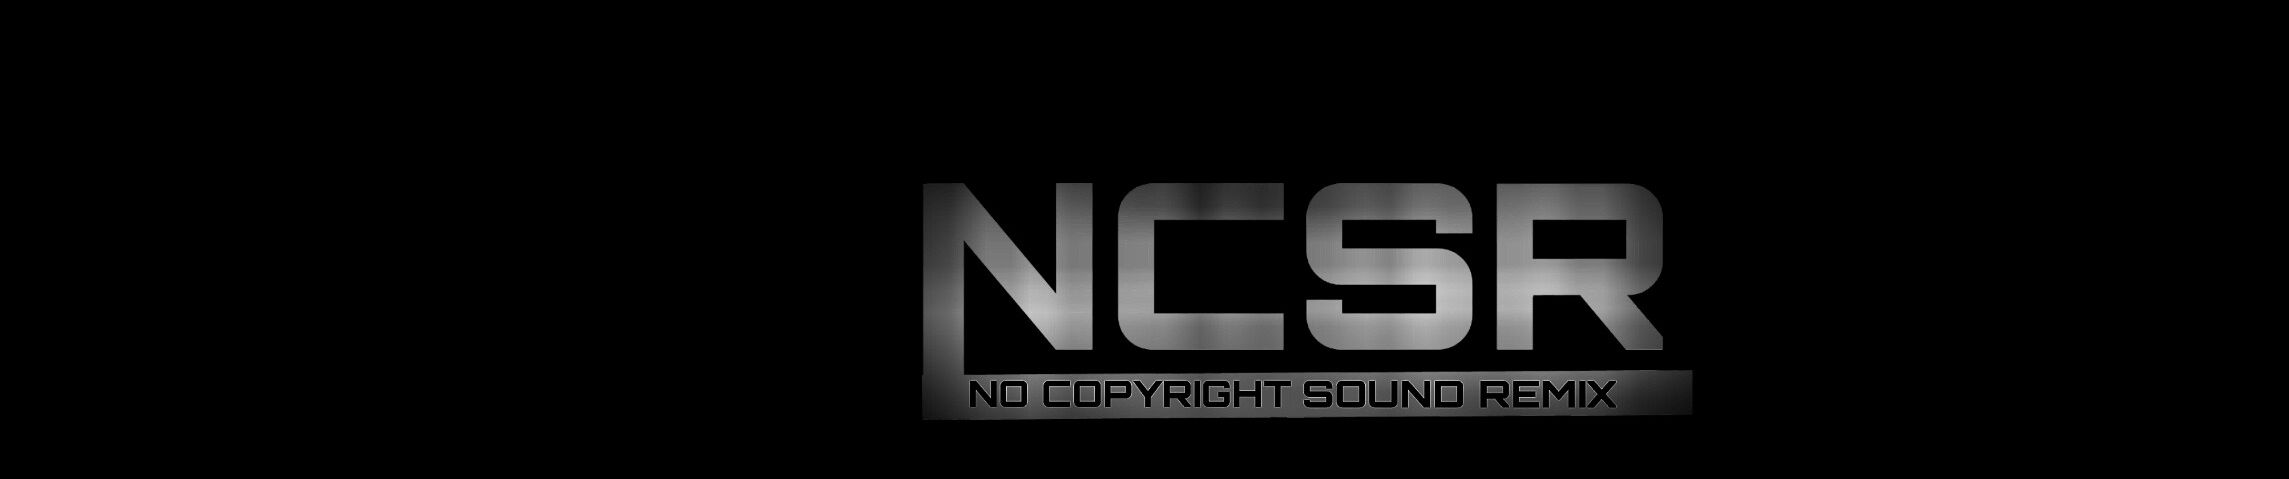 Stream 2scoops Donuts Remix Ncsr By No Copyright Sound Remix Listen Online For Free On Soundcloud - roblox 25coops donuts ncs release